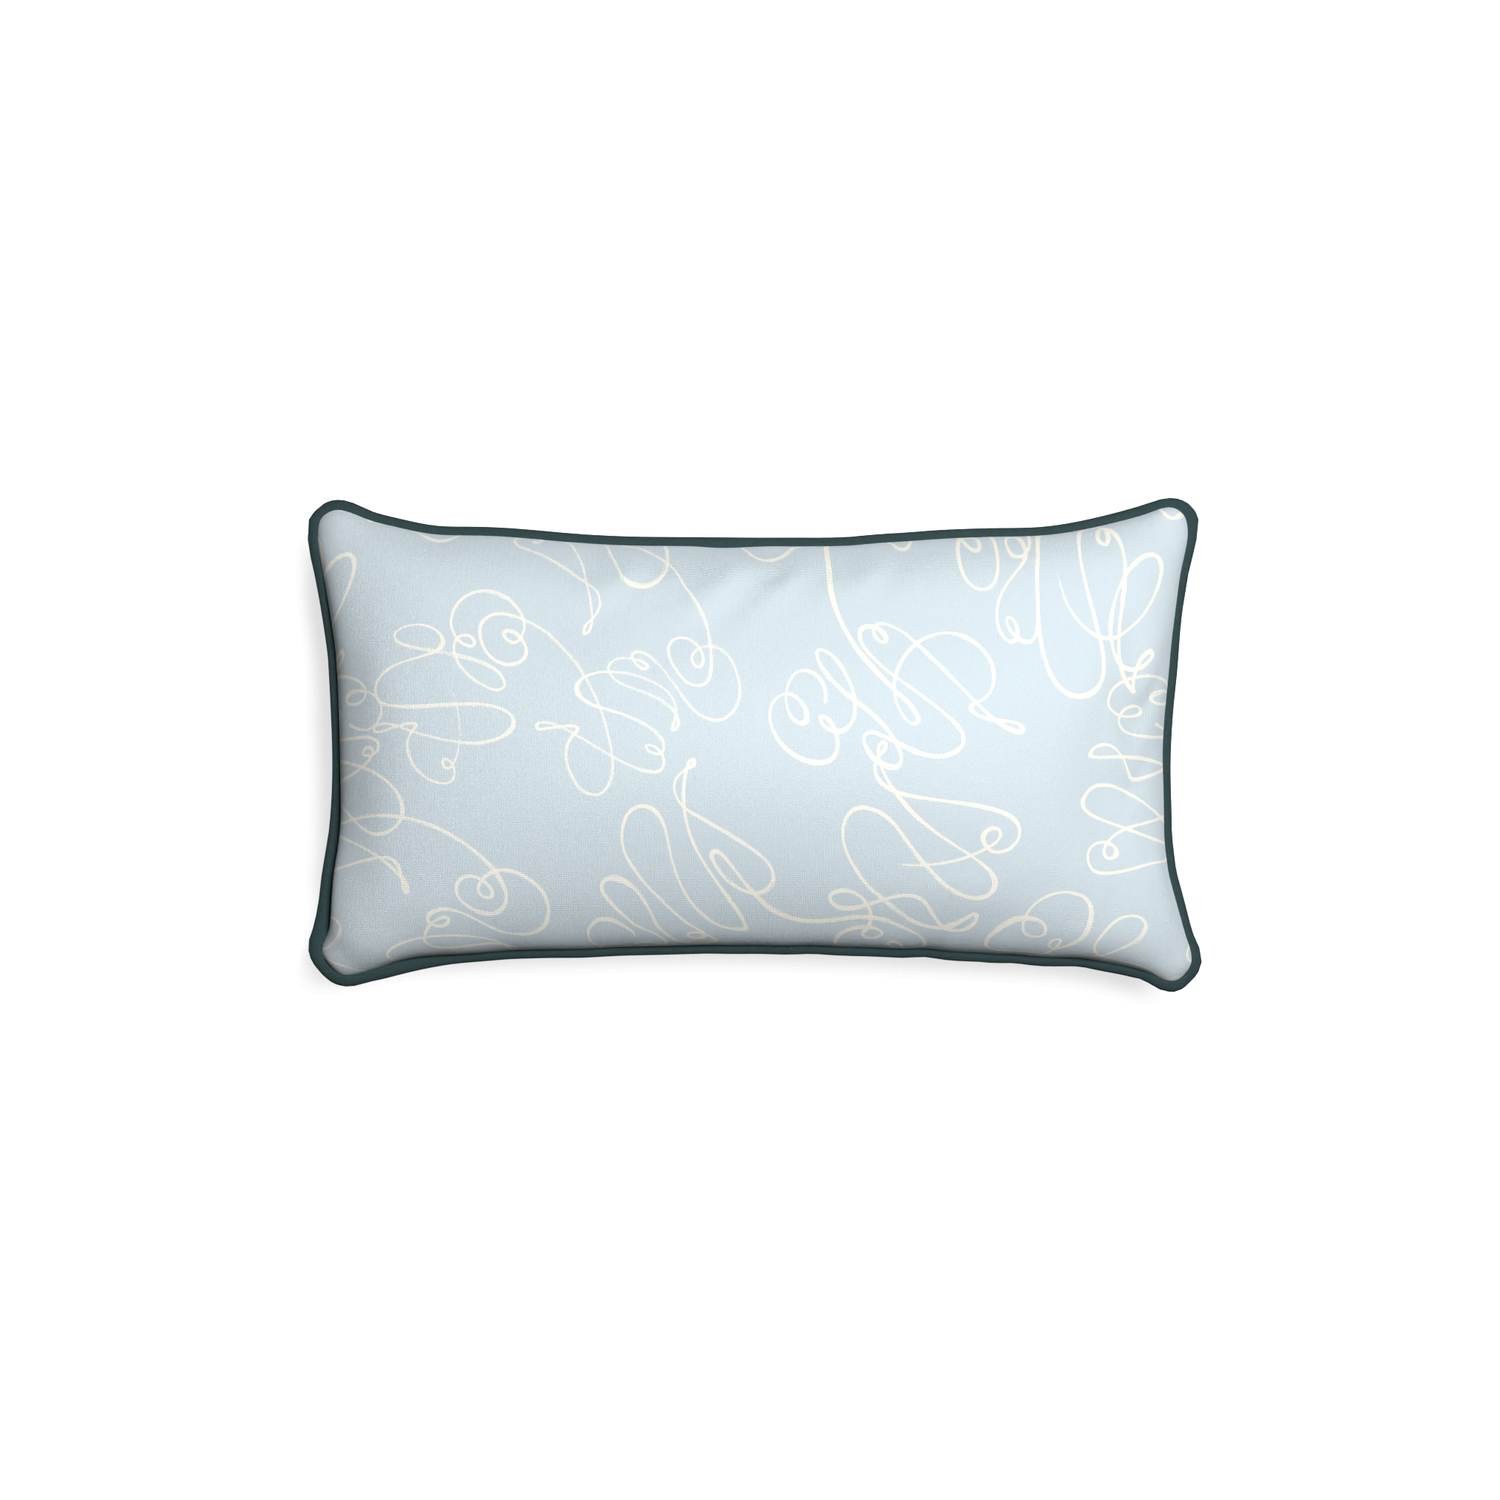 Petite-lumbar mirabella custom powder blue abstractpillow with p piping on white background